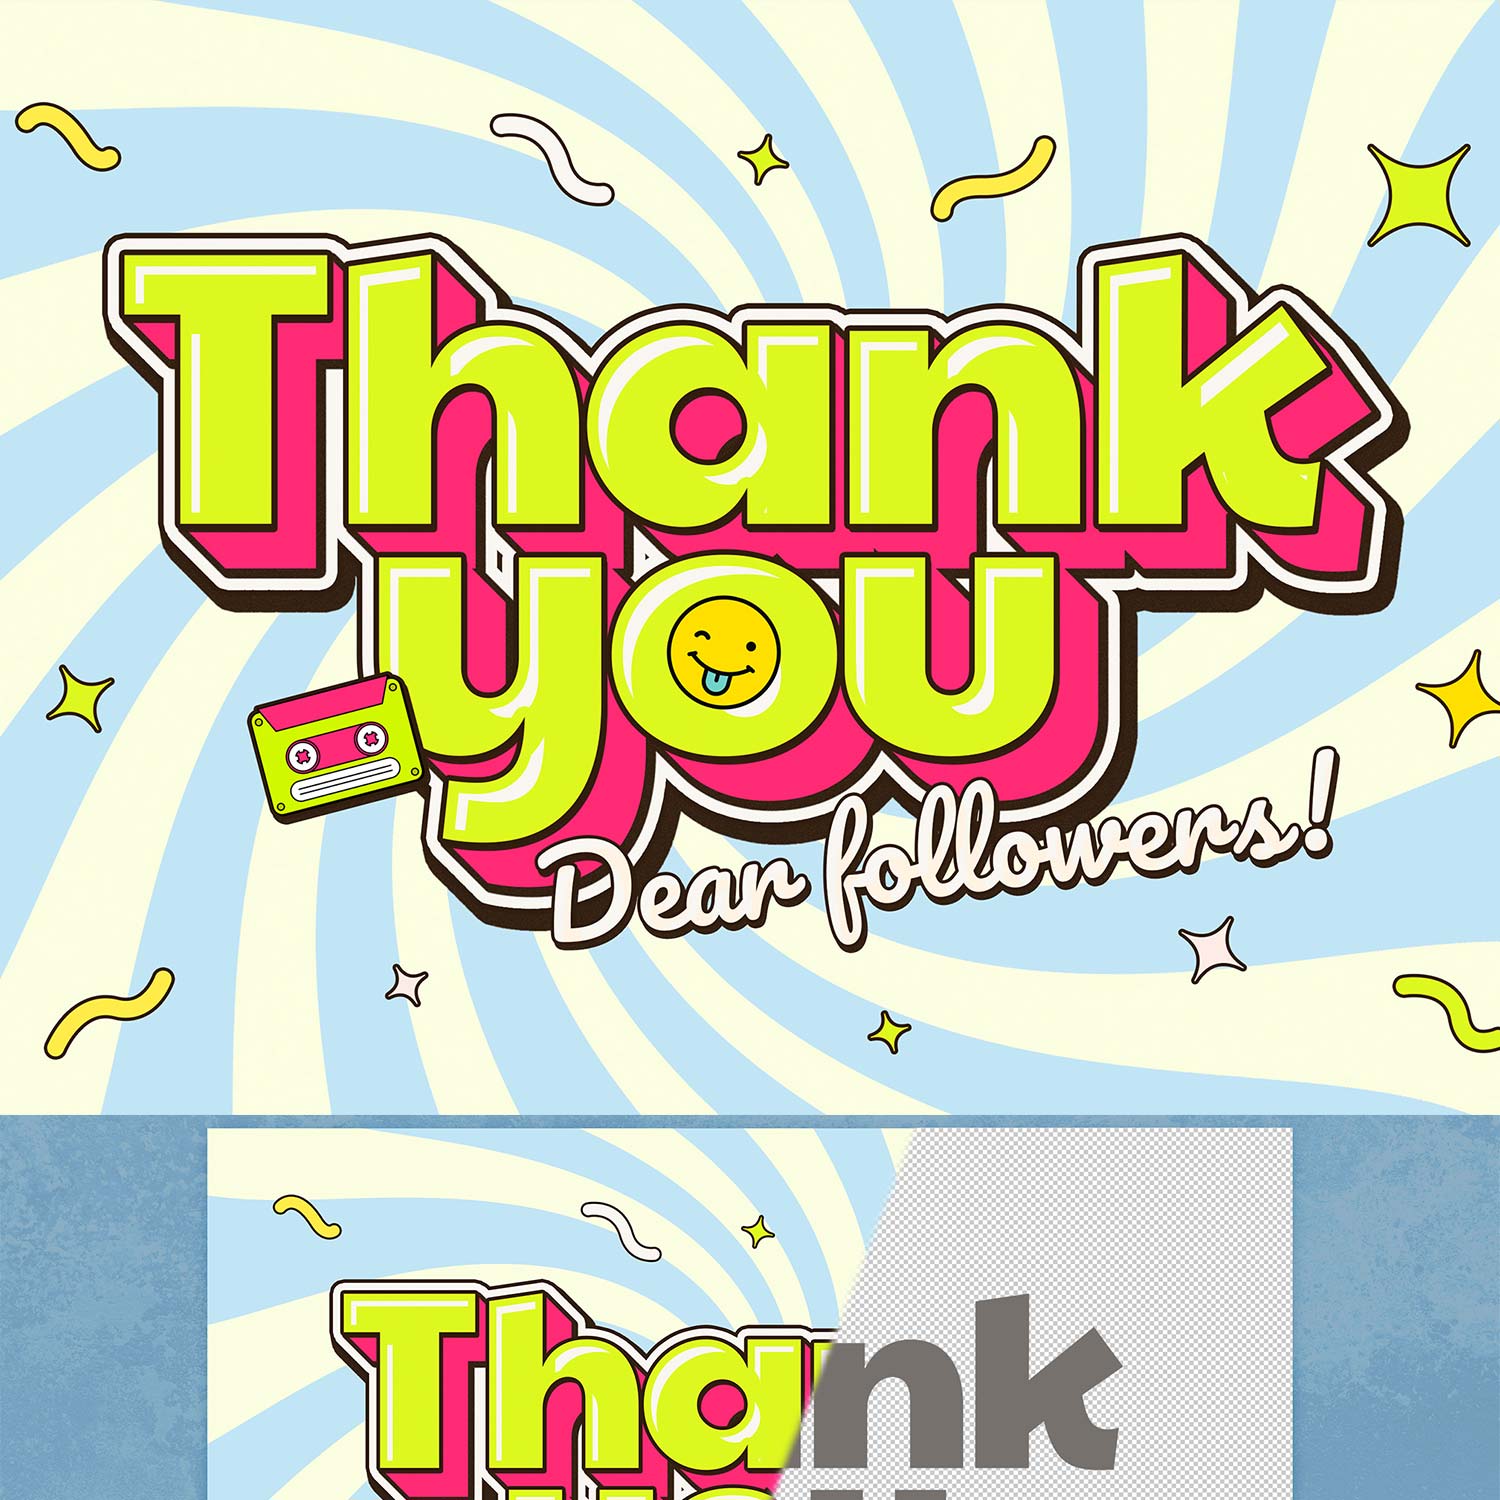 Thank You Text Effect cover image.